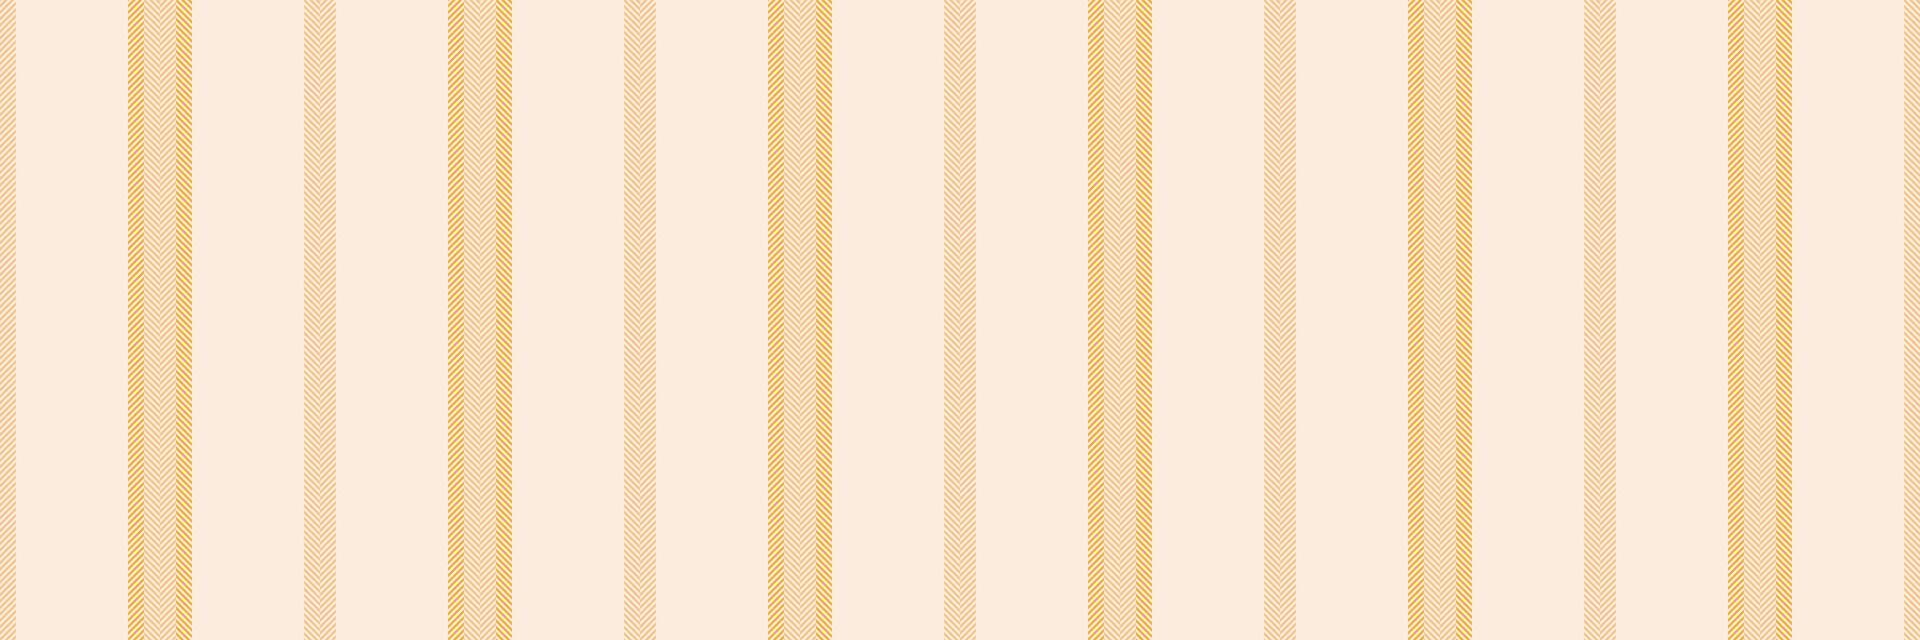 December vertical stripe fabric, kingdom texture seamless lines. Garment pattern textile background vector in light and orange colors.